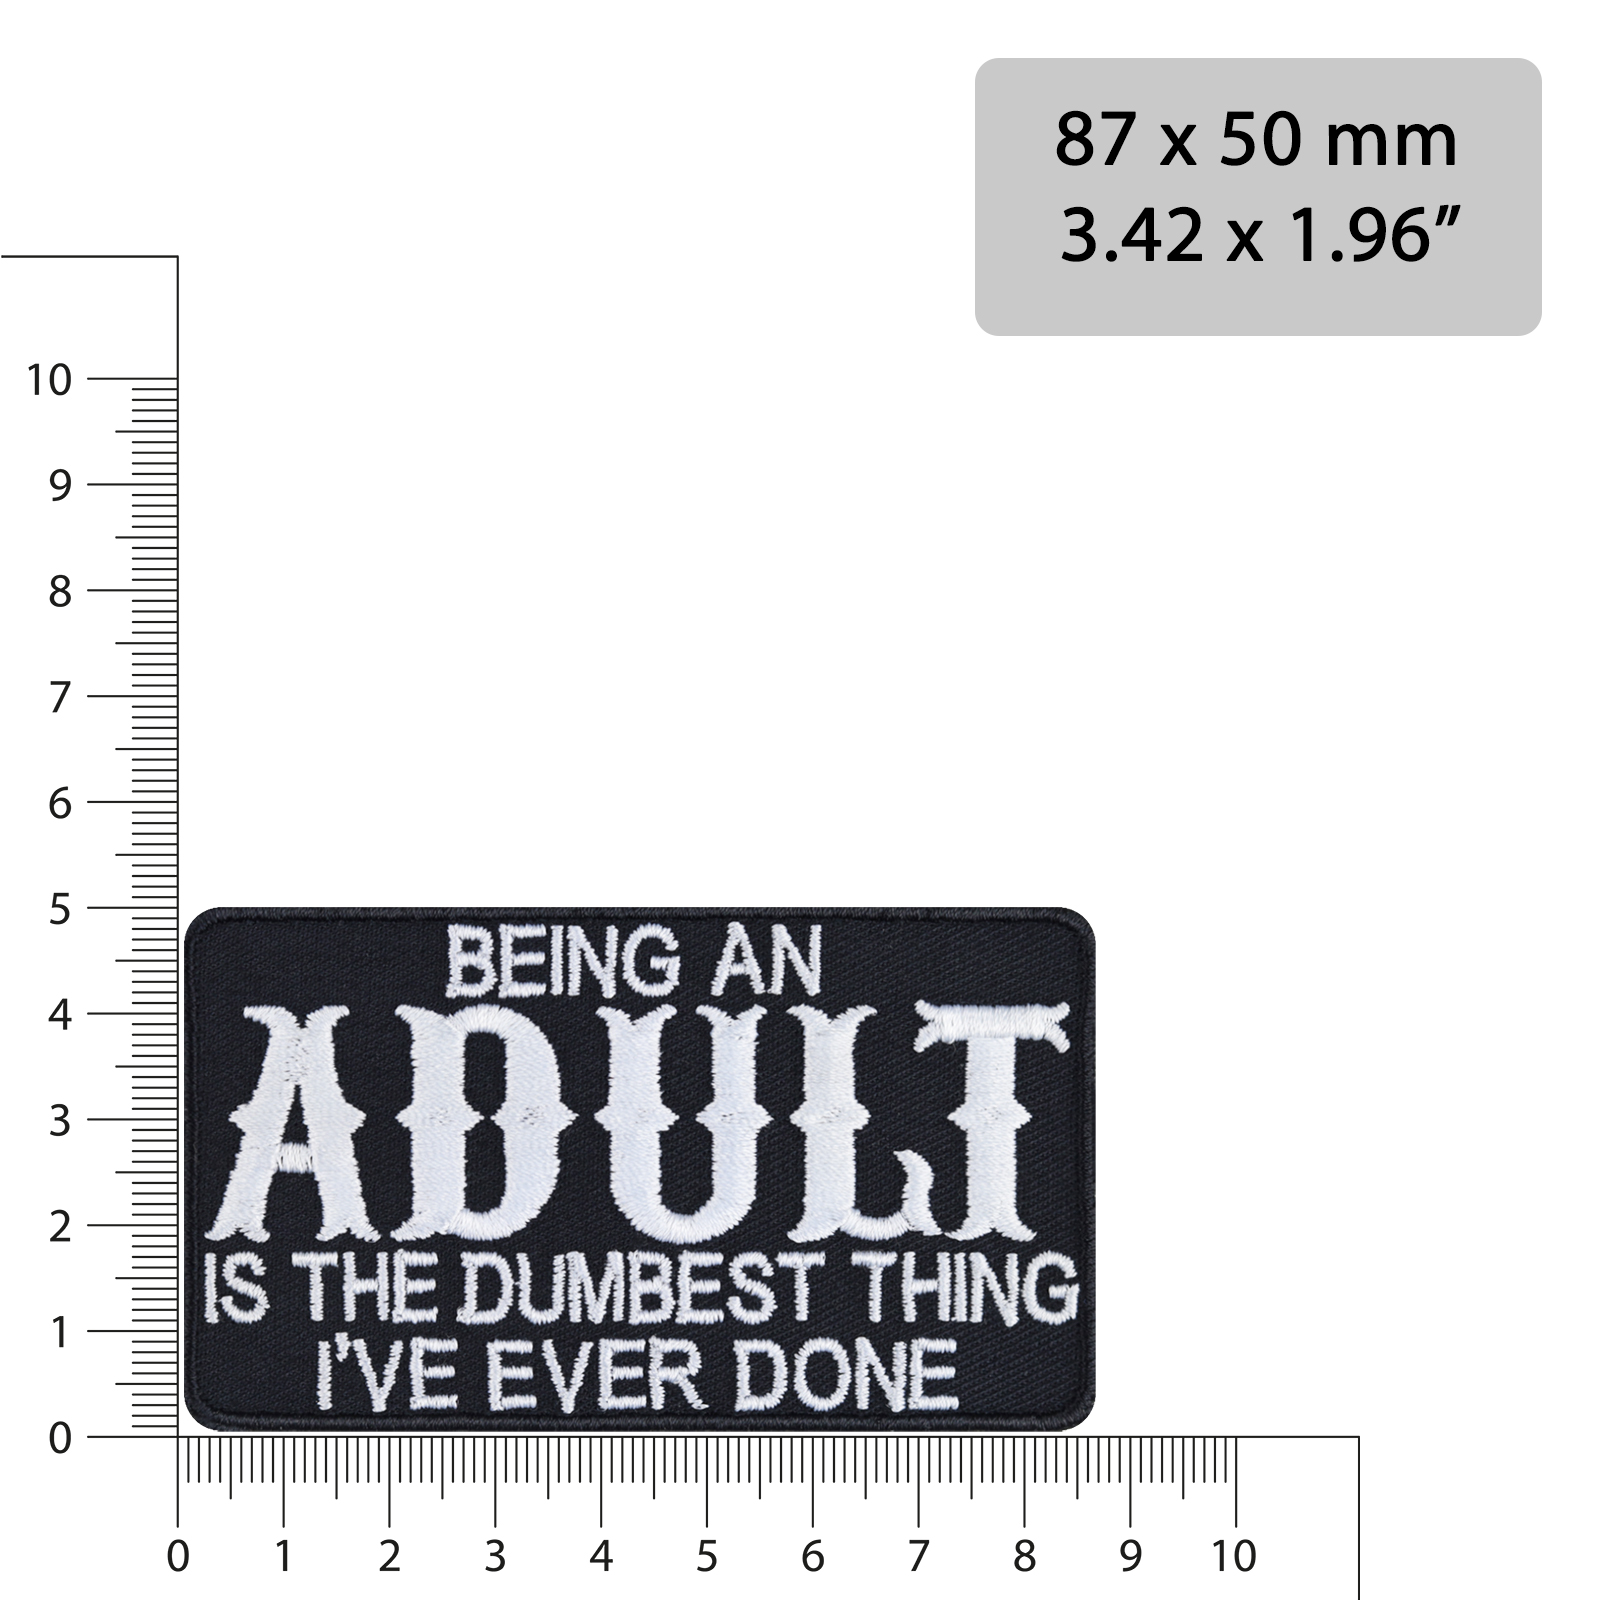 Being an adult is the dumbest thing I've ever done - Patch